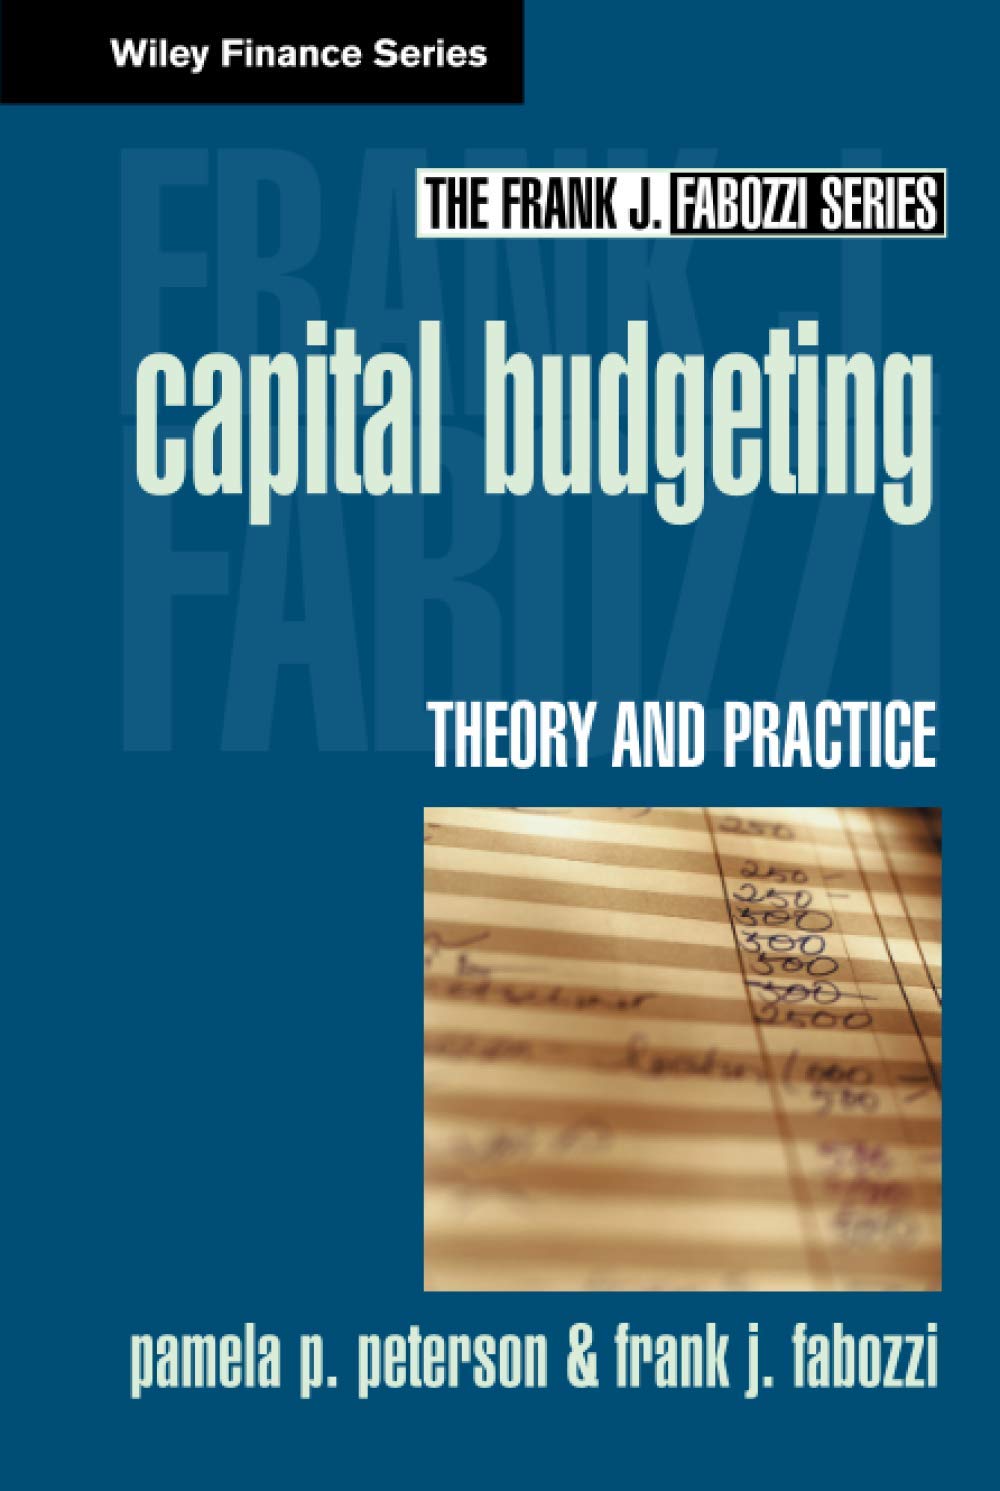 CAPITAL BUDGETING: THEORY AND PRACTICE